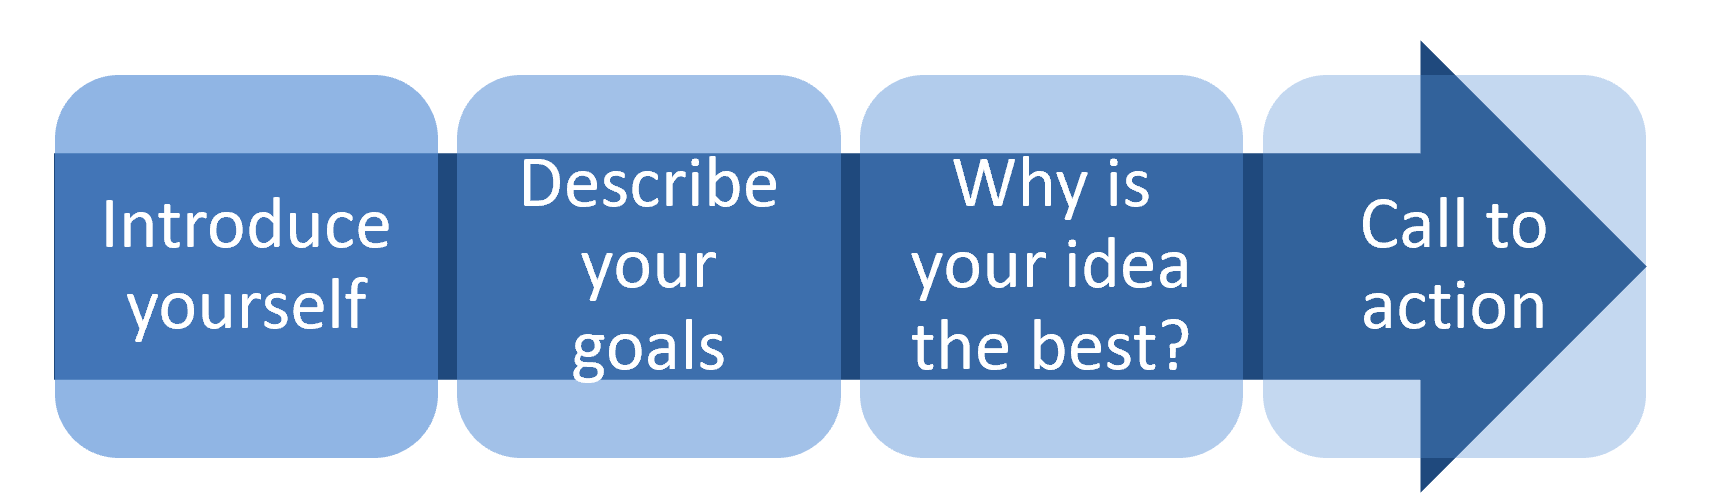 a diagram for your pitch - the steps are 1) introduce yourself 2) describe your goals 3) why is your idea the best? 4) call to action